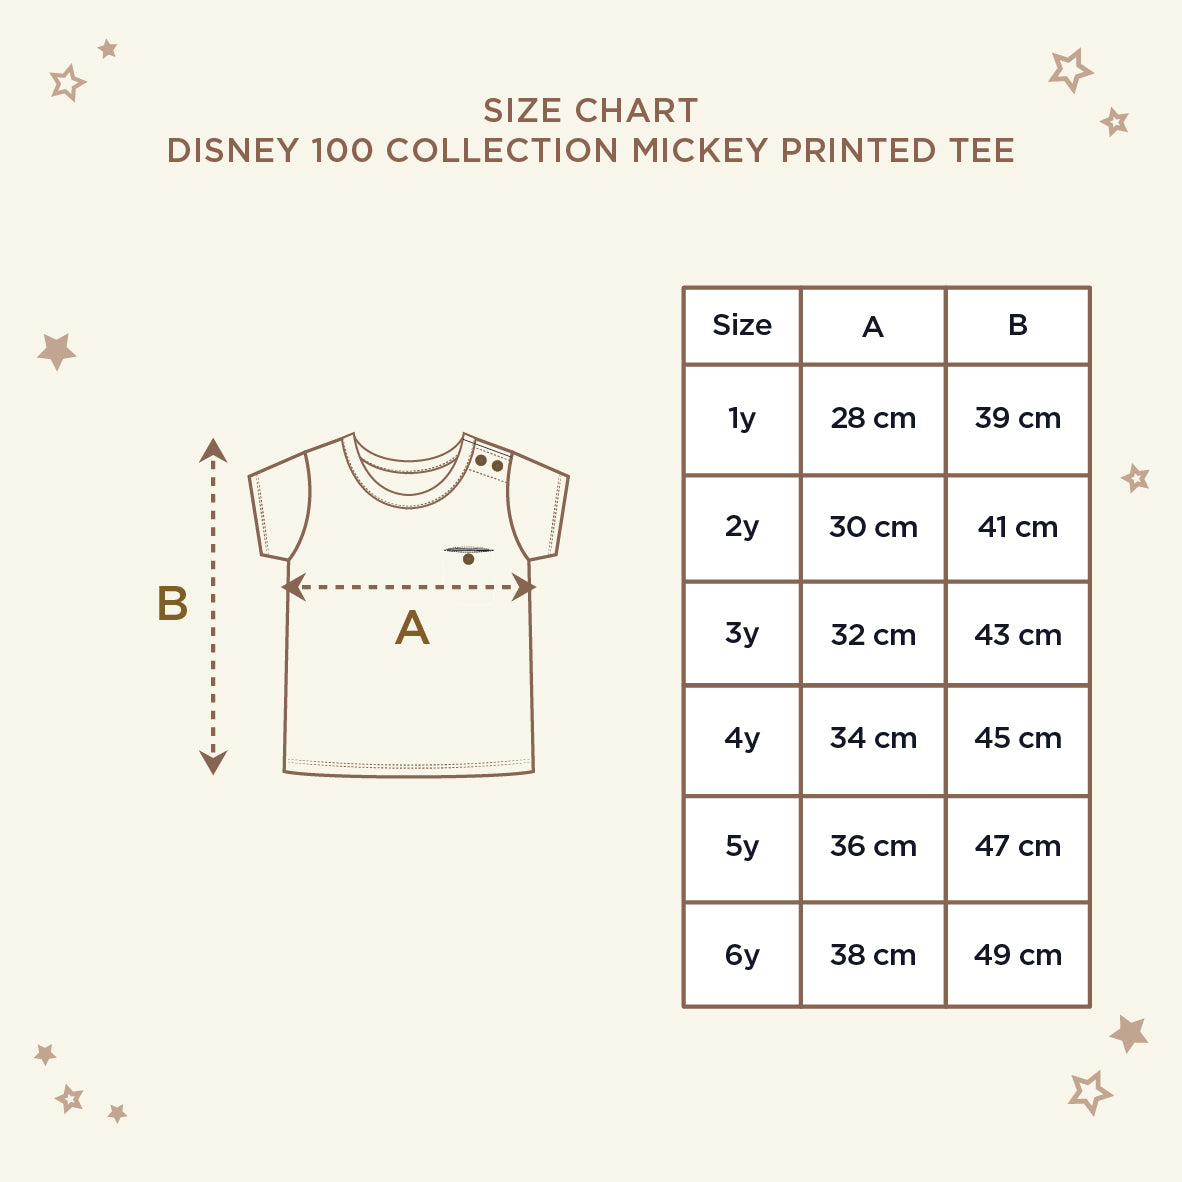 Disney 100 Collection Mickey Printed Tee